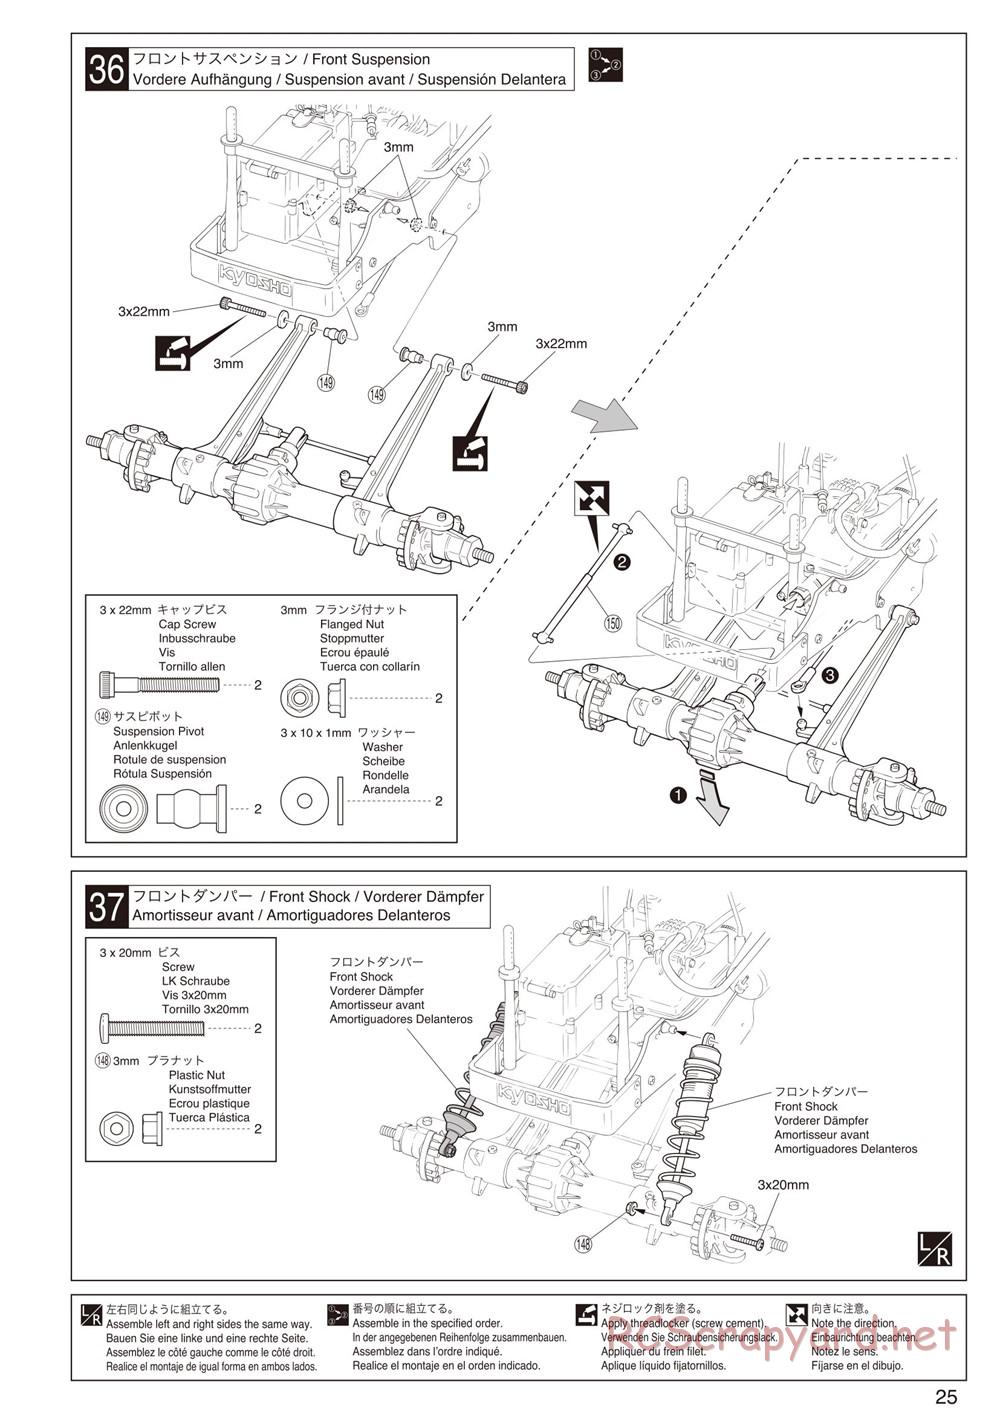 Kyosho - Mad Force Cruiser - Manual - Page 25